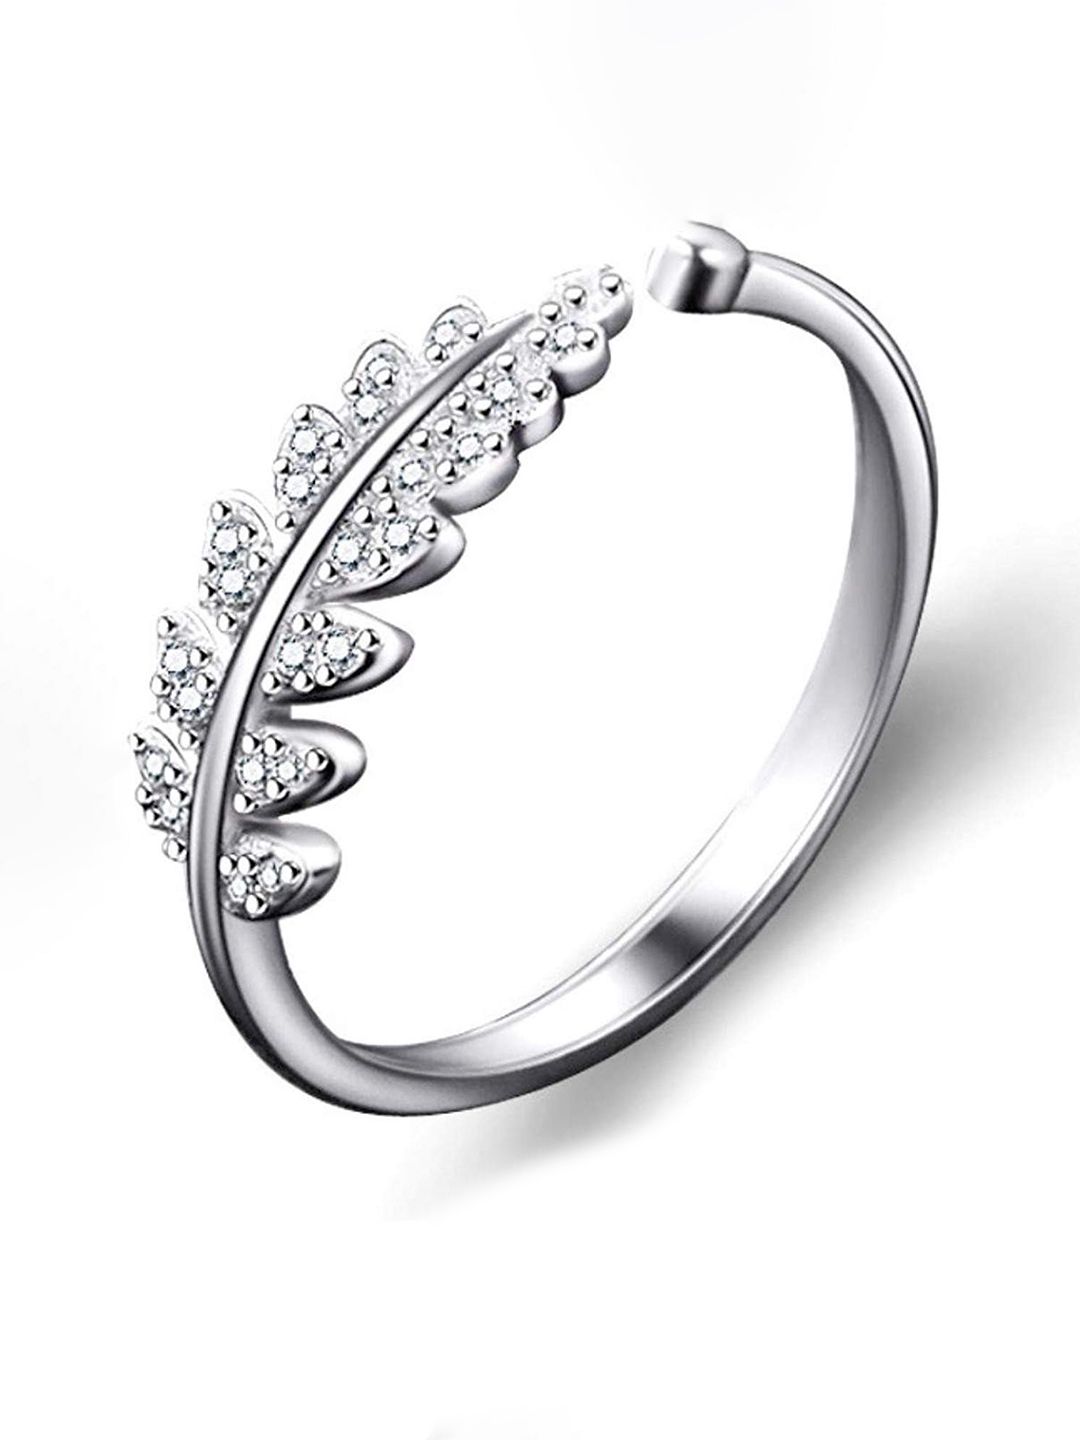 Sarvda Silver-Plated Leaf Ring Price in India